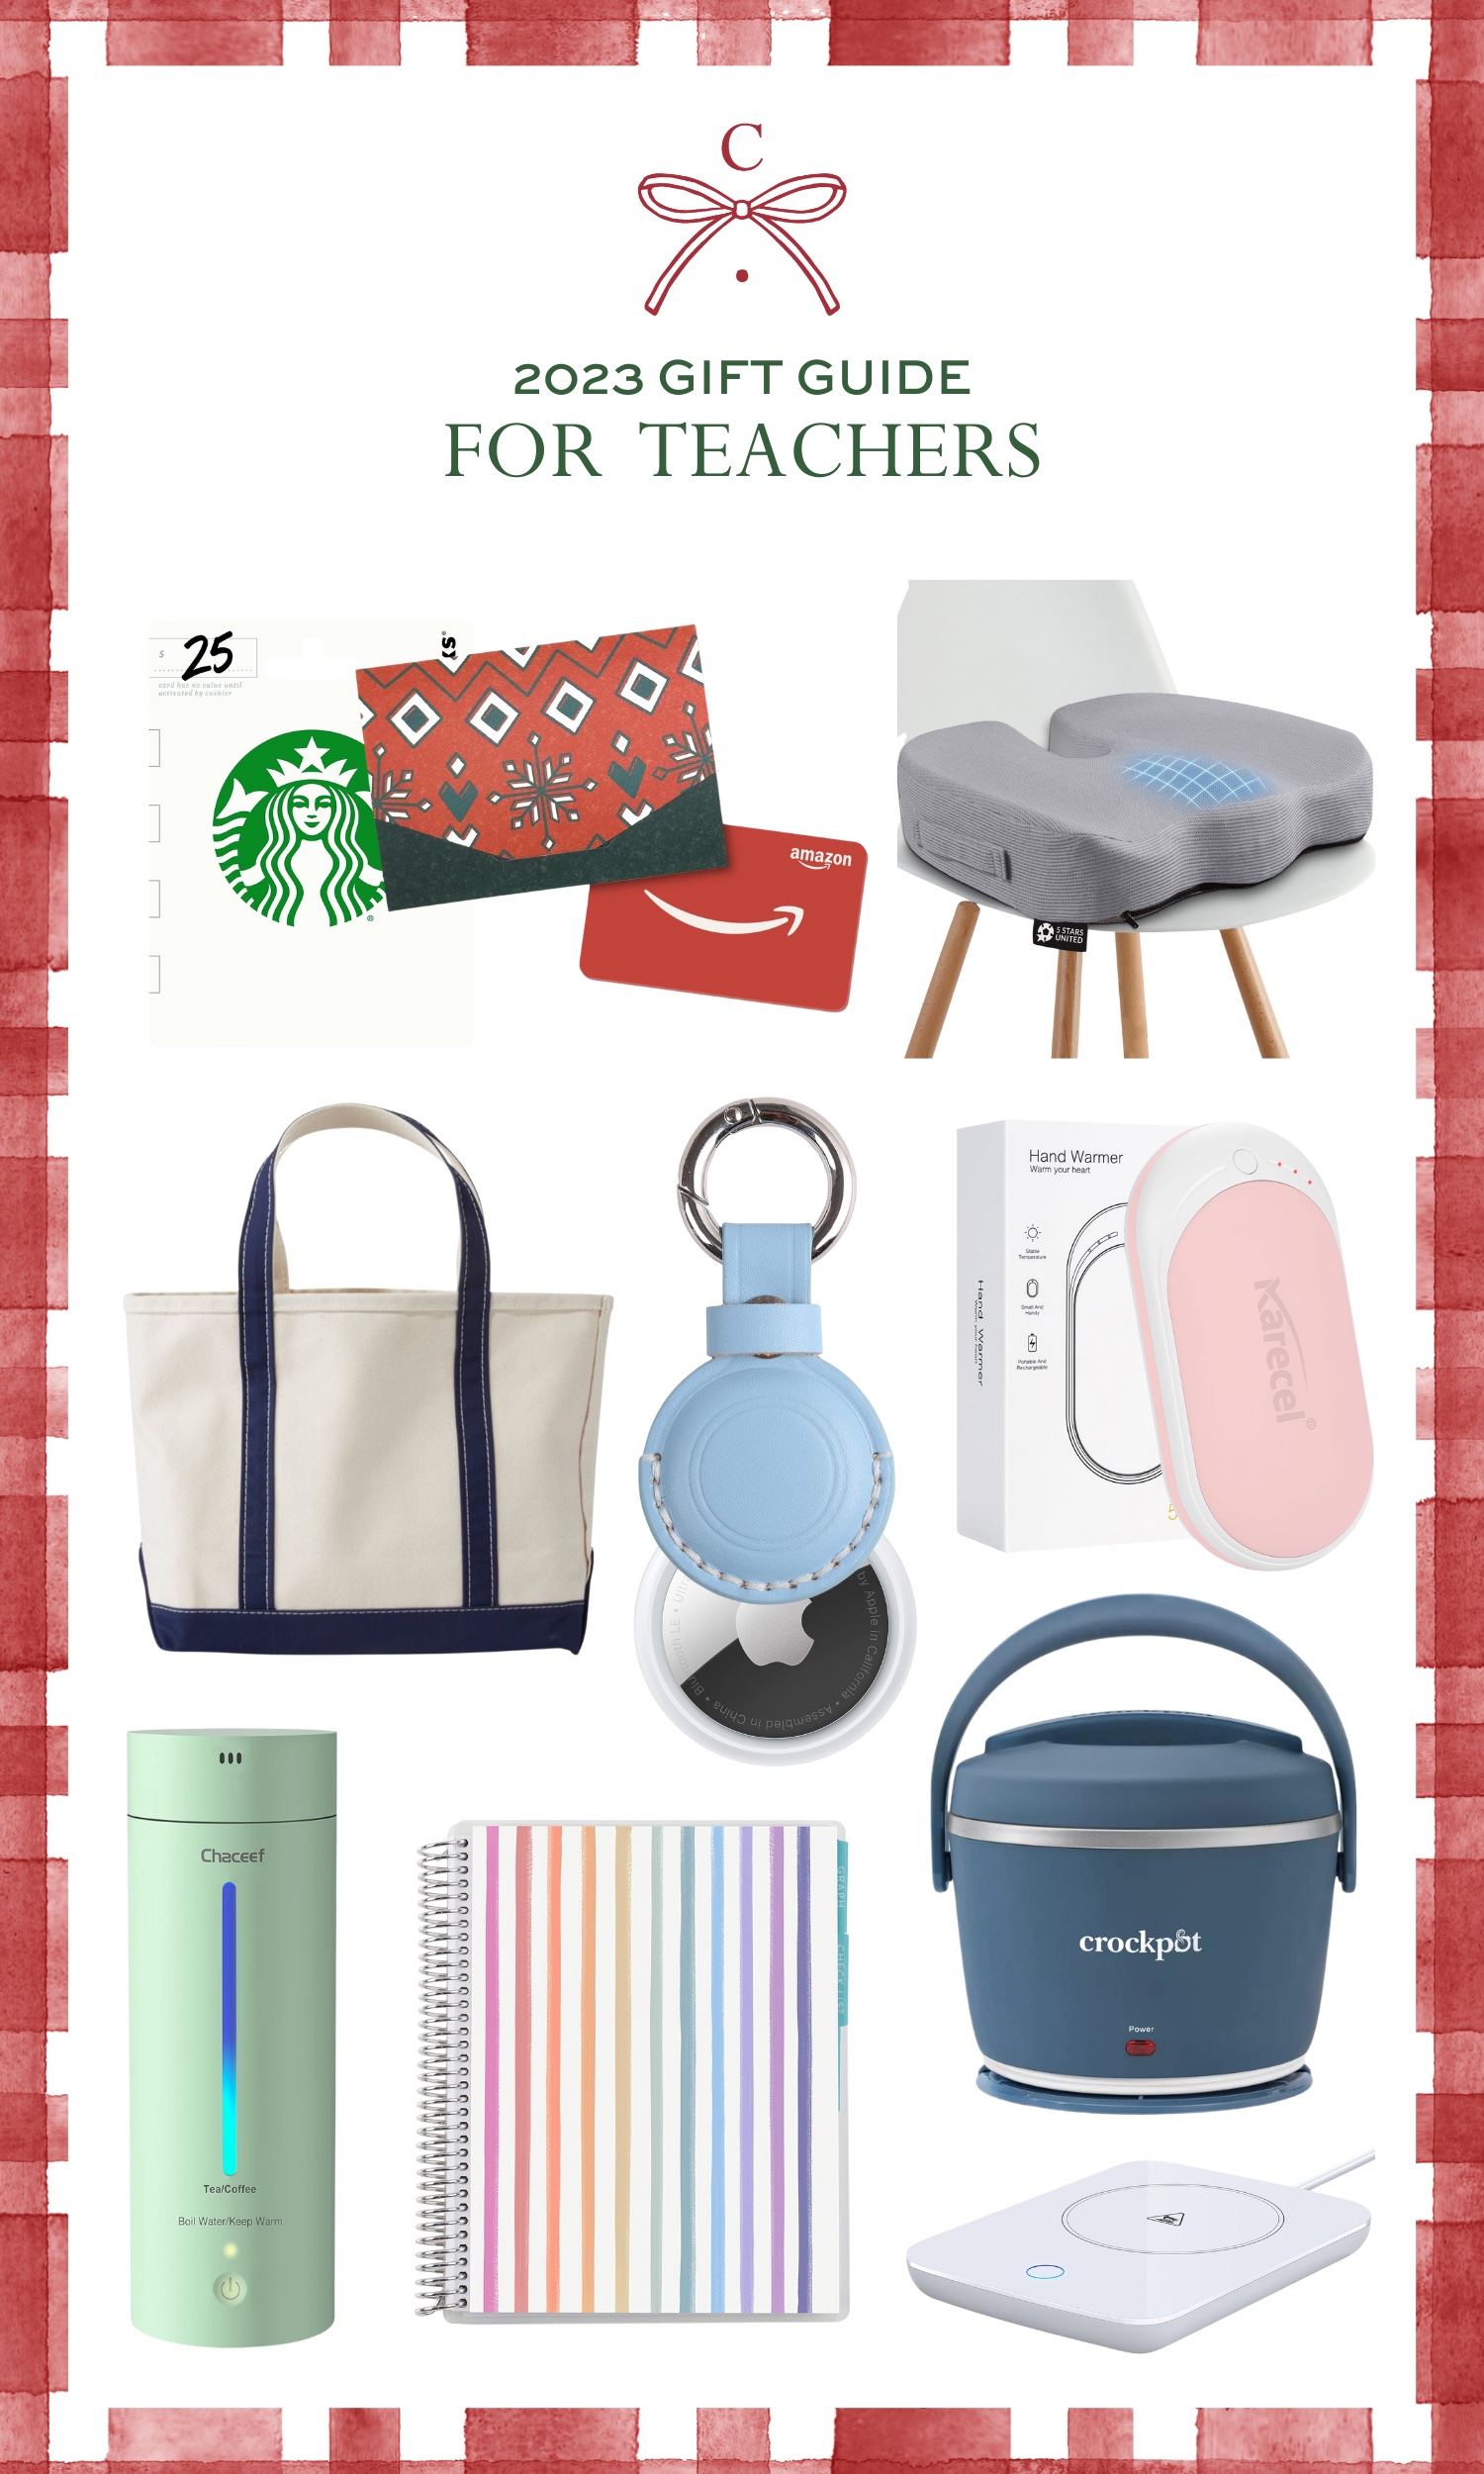 teacher gift ideas: starbucks gift card, amazon gift card, seat cushion, llbean boat and tote, airtag, airtag holder, rechargeable hand warmers, electric kettle, erin condren teacher planner, crockpot portable food warmer and electric lunchbox, and mug warmer